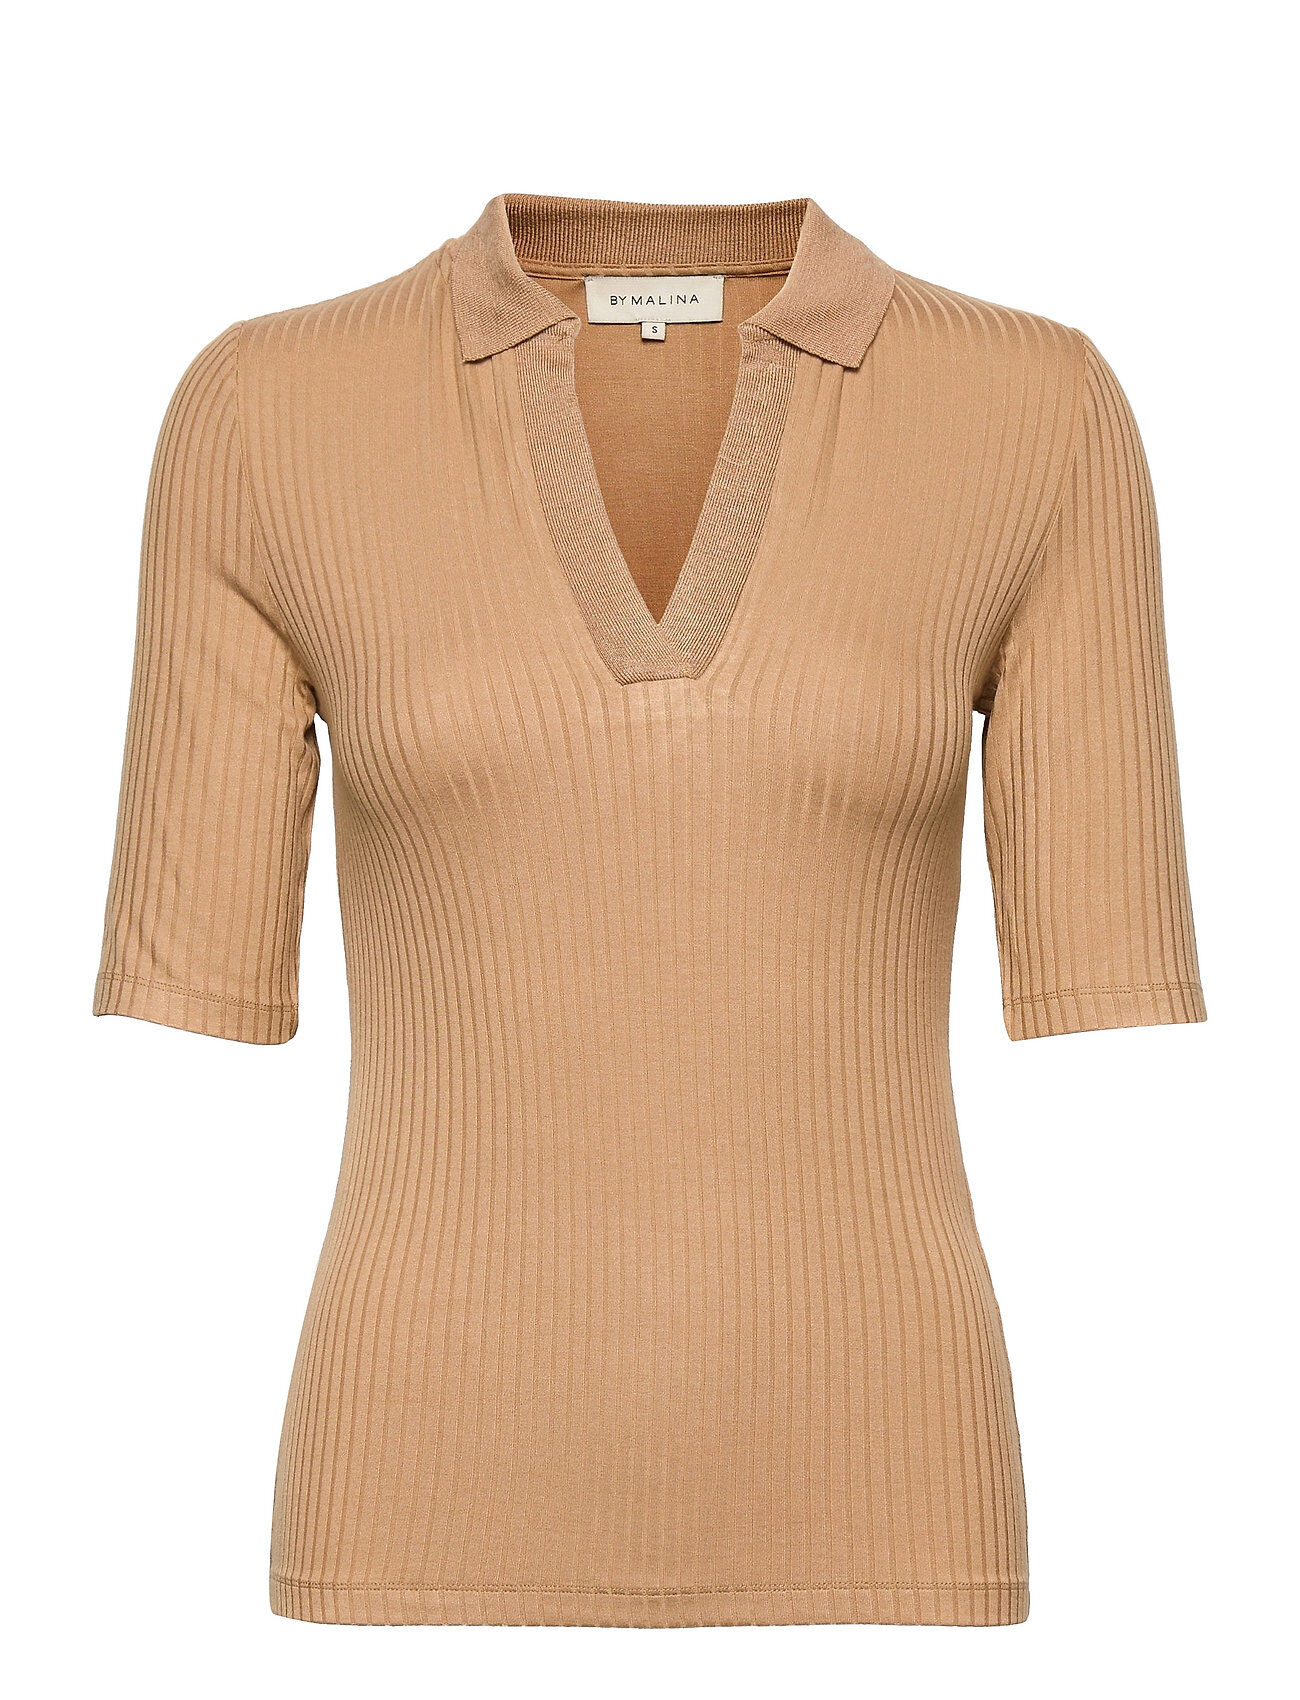 By Malina Gaia Top Pullover Beige By Malina